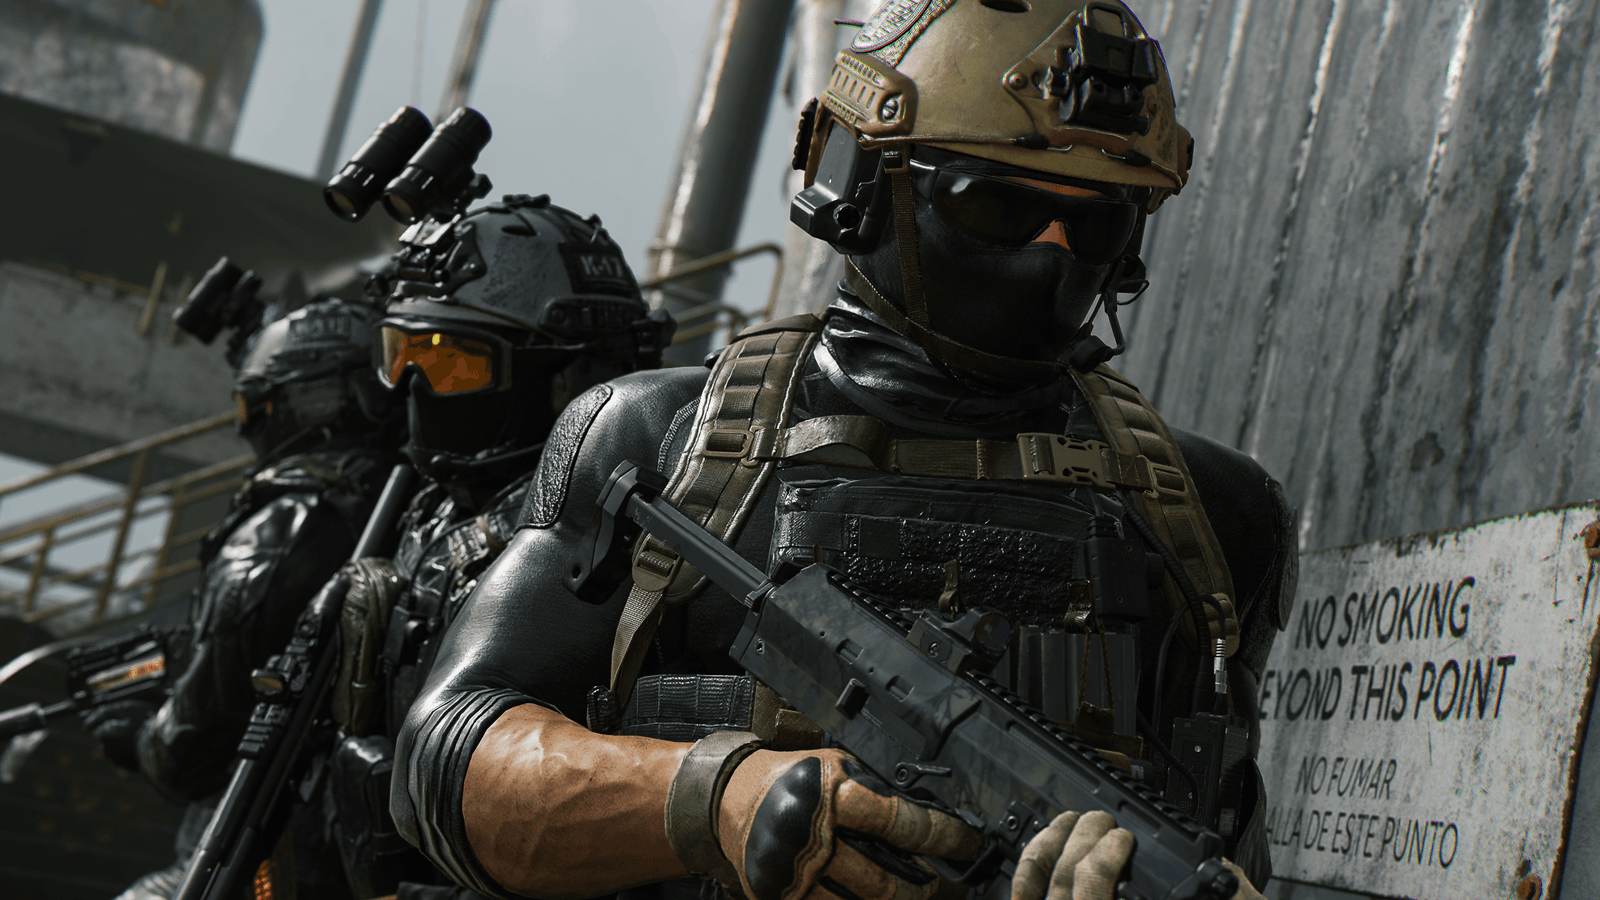 Microsoft, Sony enter "binding agreement to keep Call of Duty on PlayStation" after ABK acquisition | GamesIndustry.biz